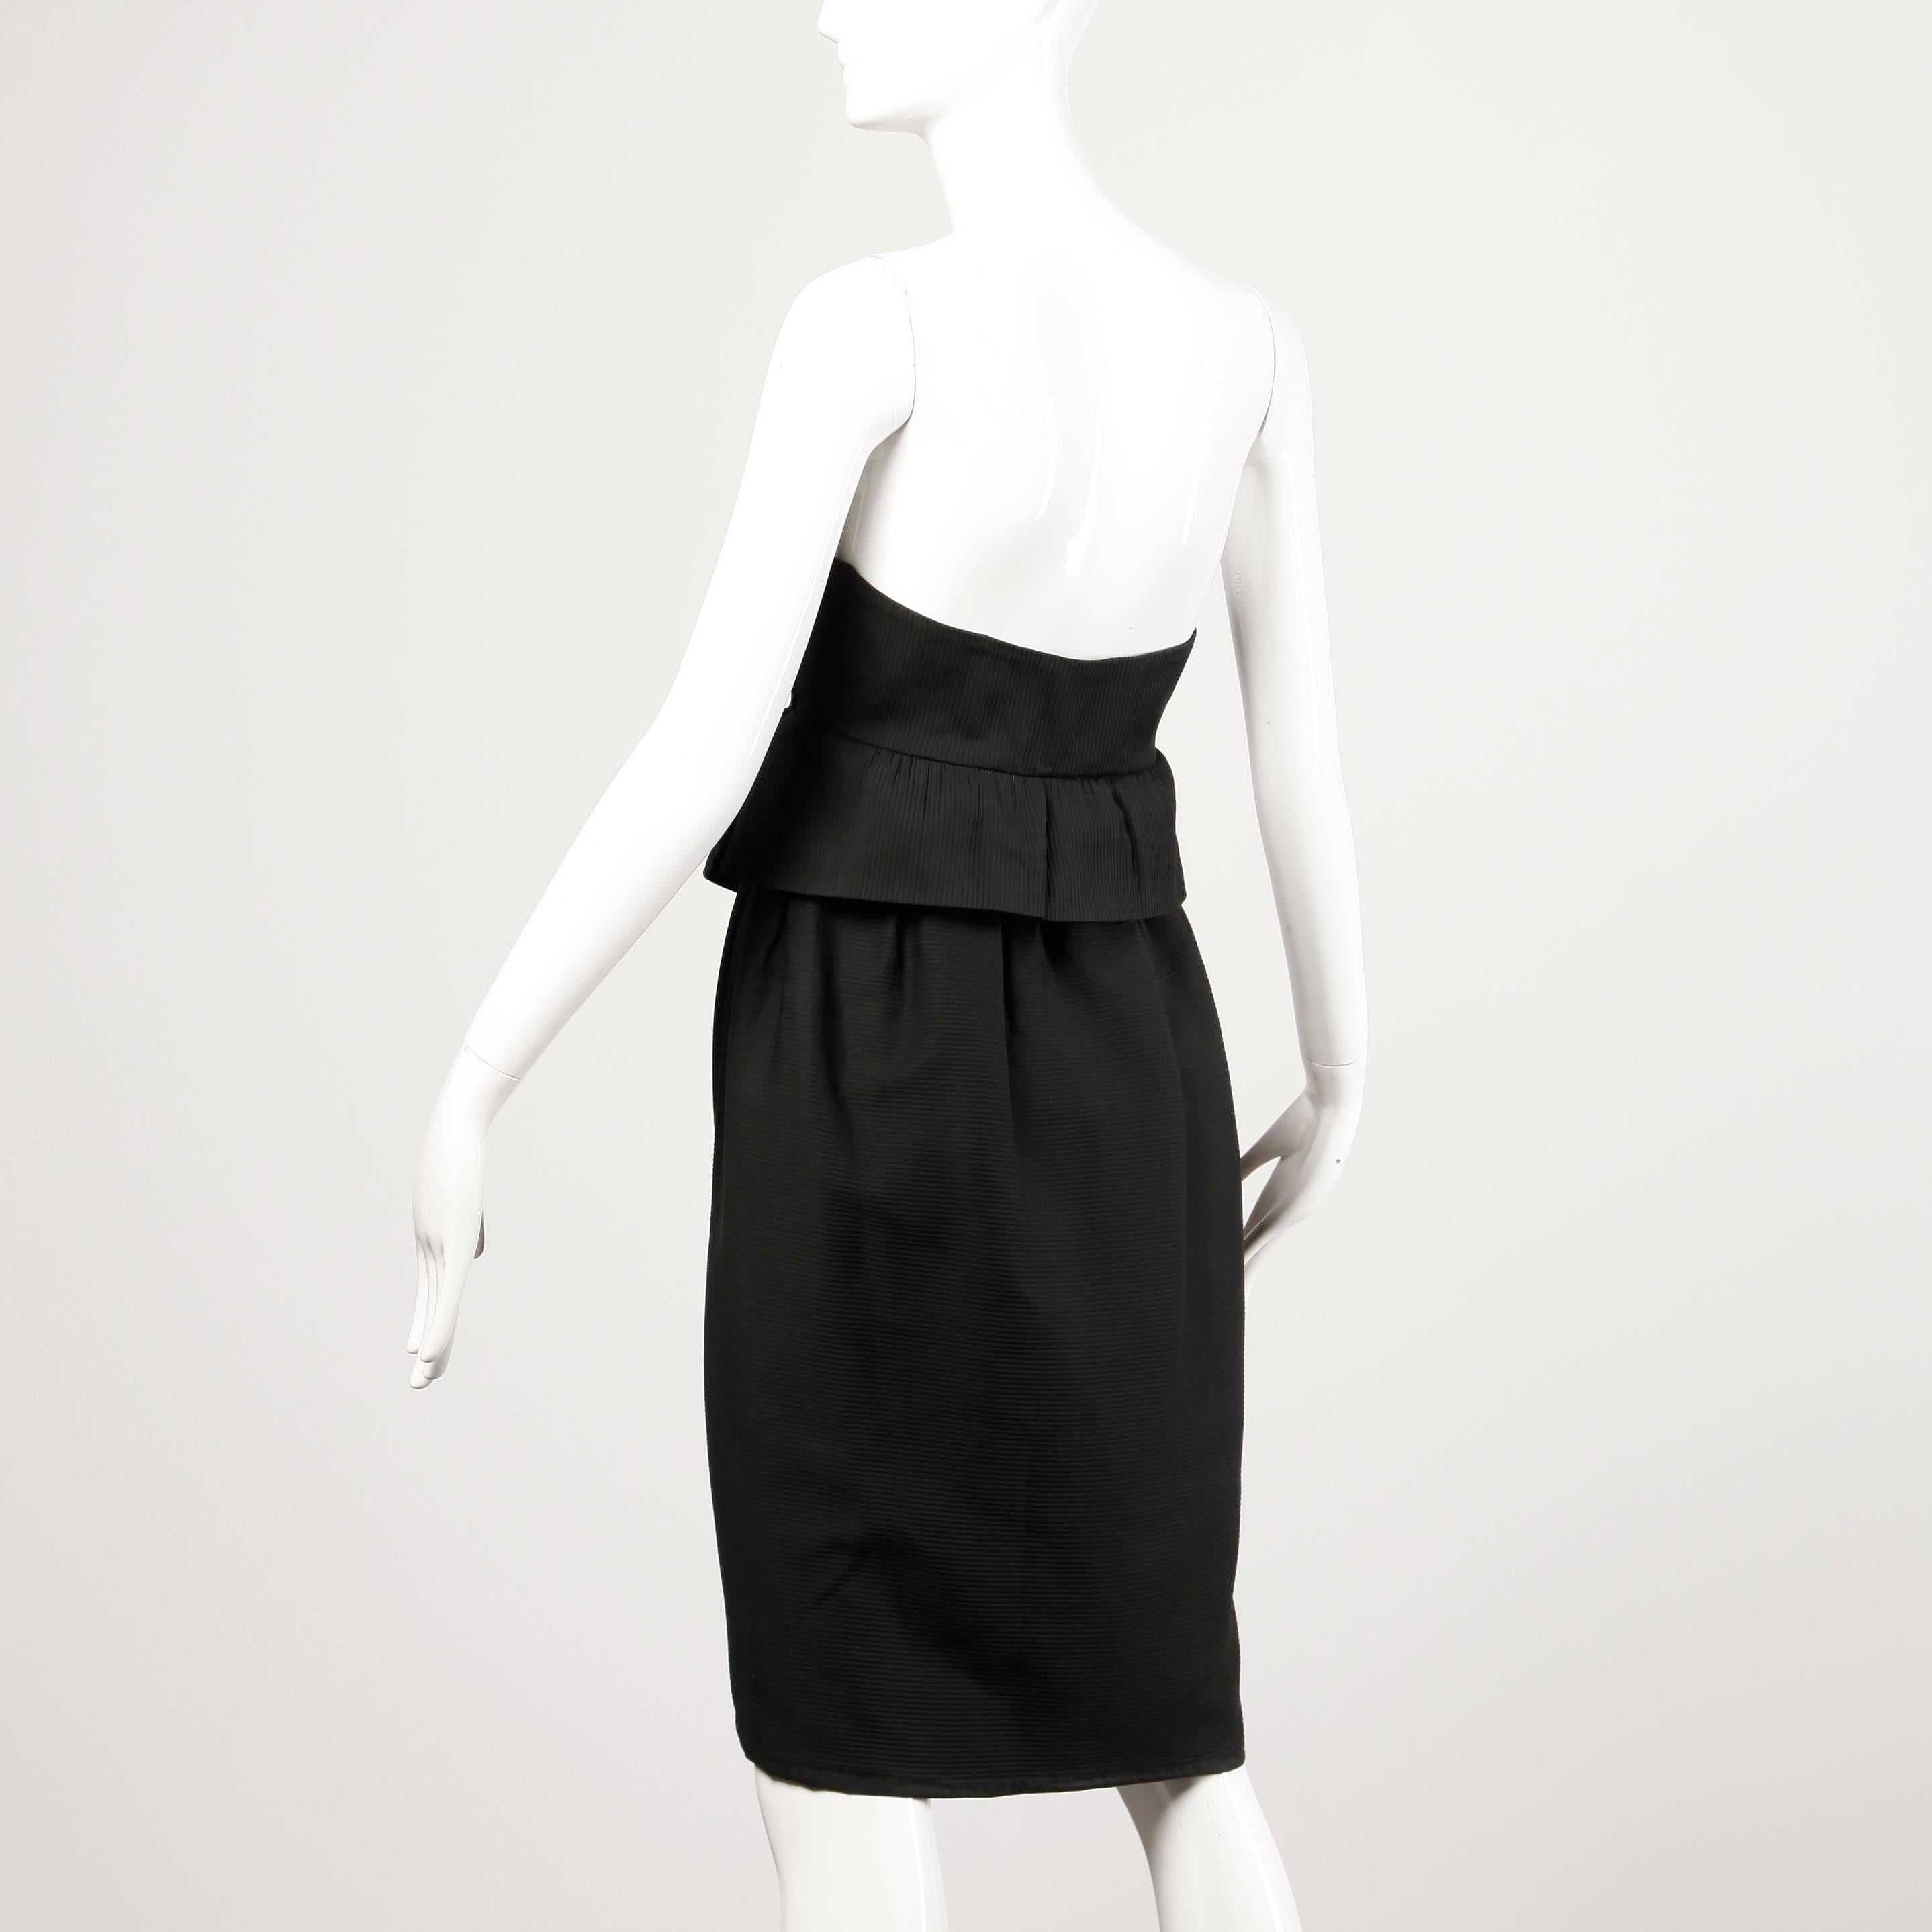 Lanvin 1980s Vintage Strapless Little Black Dress with Peplum In Excellent Condition For Sale In Sparks, NV